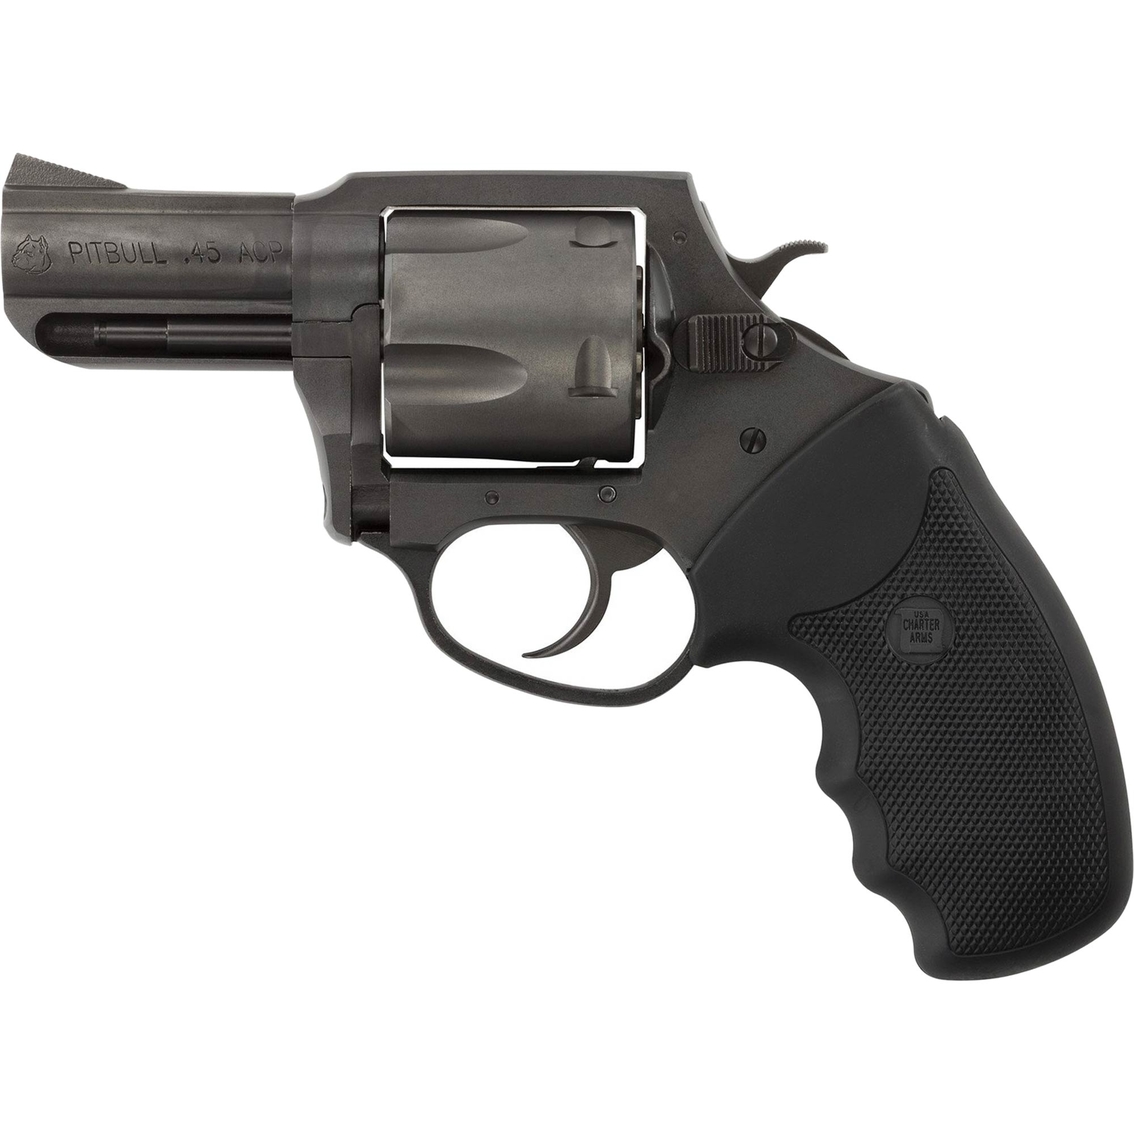 Charter Arms Pitbull 45 ACP 2.5 in. Barrel 5 Rds Revolver Black - Image 2 of 2